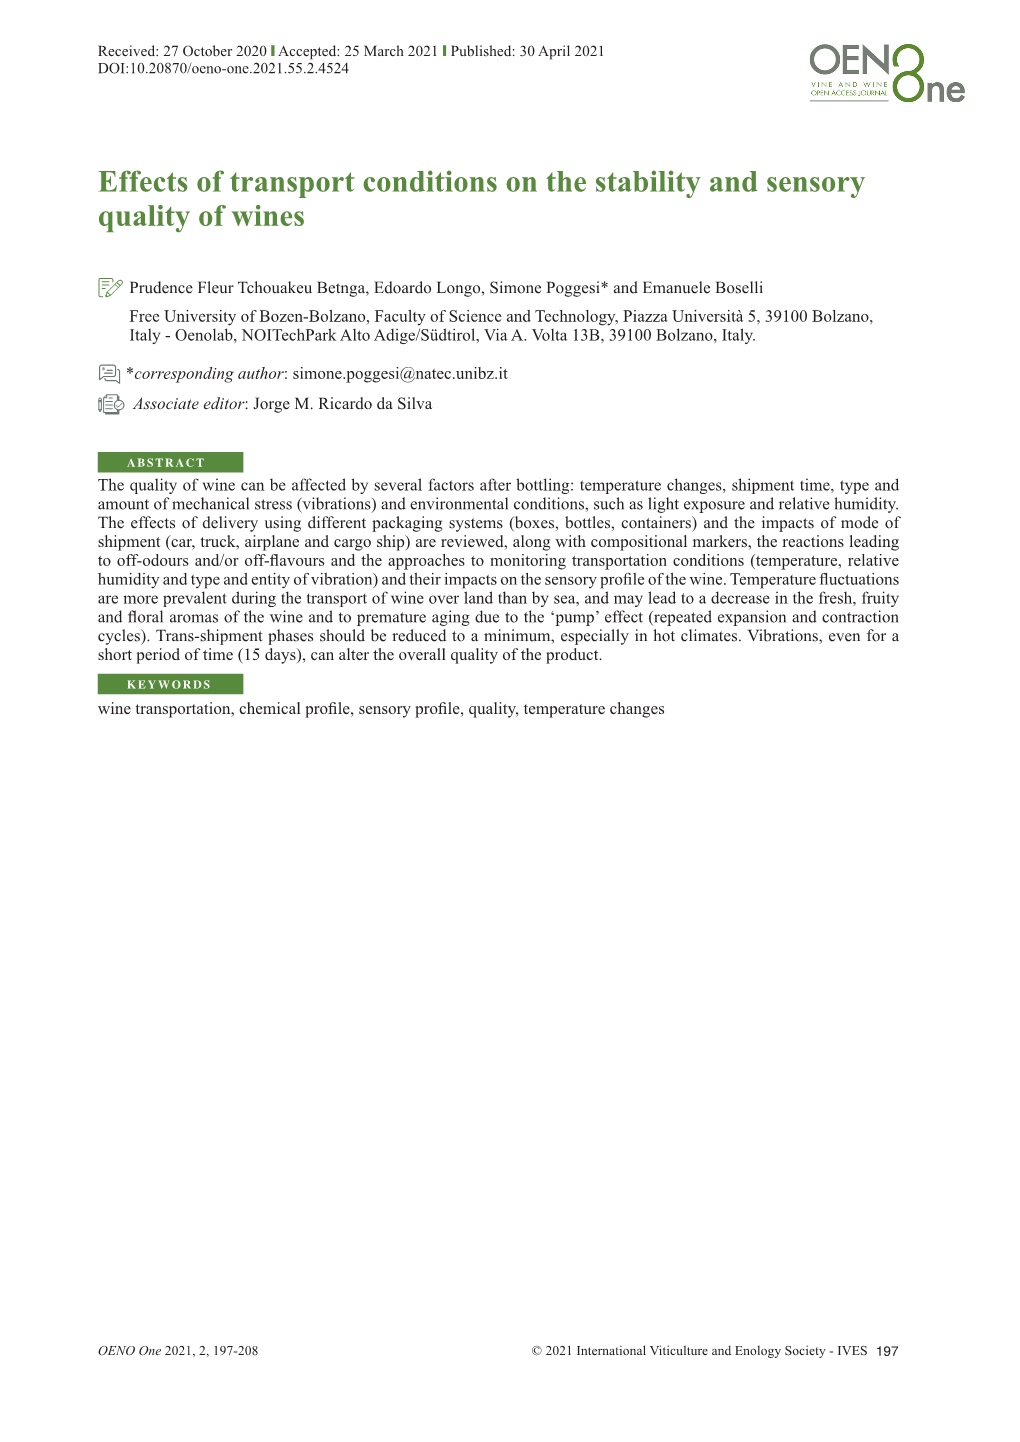 Effects of Transport Conditions on the Stability and Sensory Quality of Wines